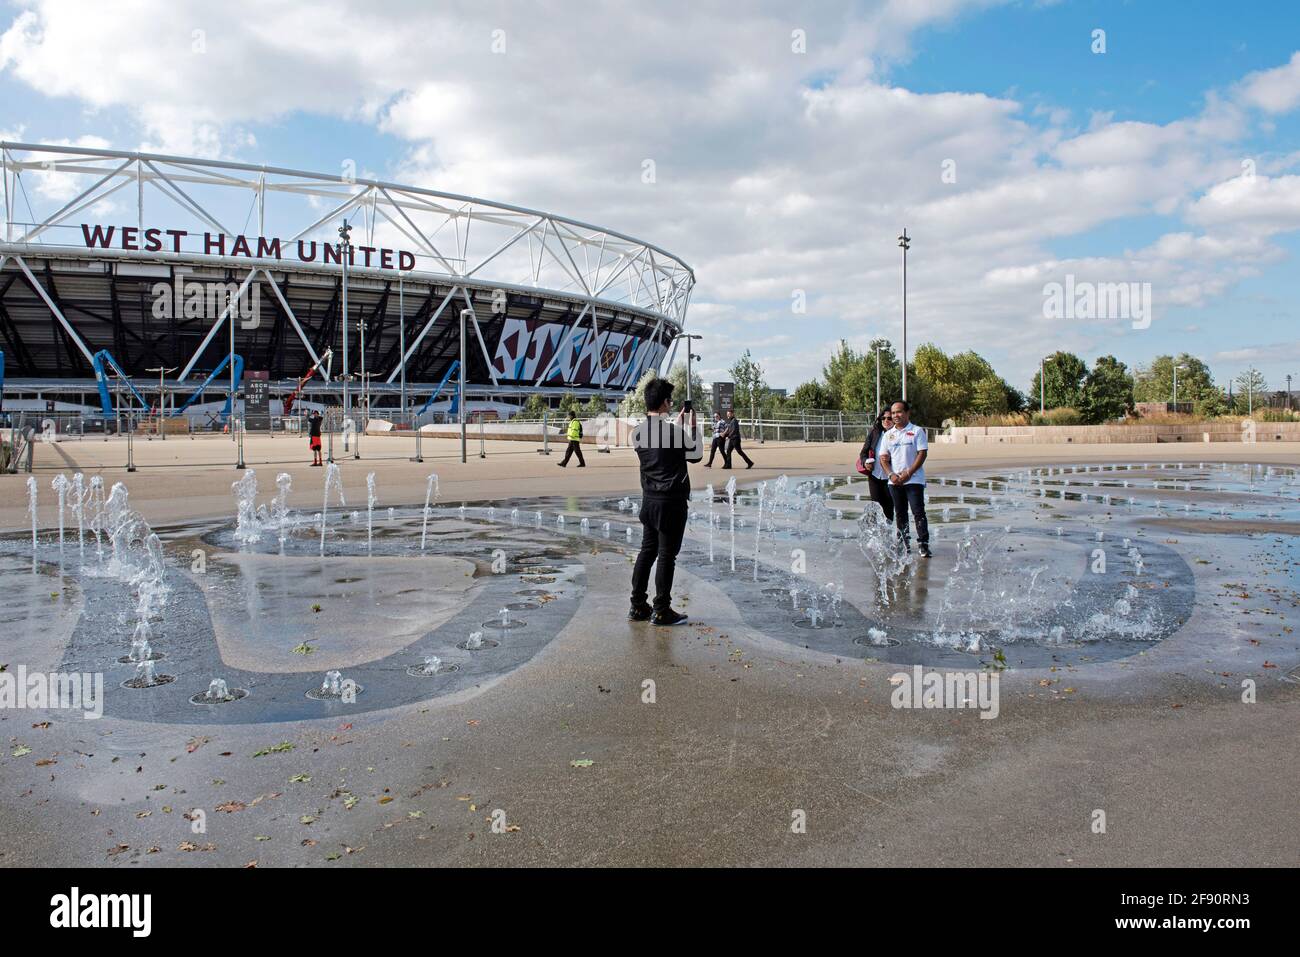 Man photographing people in water fountains with West Ham United stadium to left Queen Elizabeth Olympic Park Stock Photo